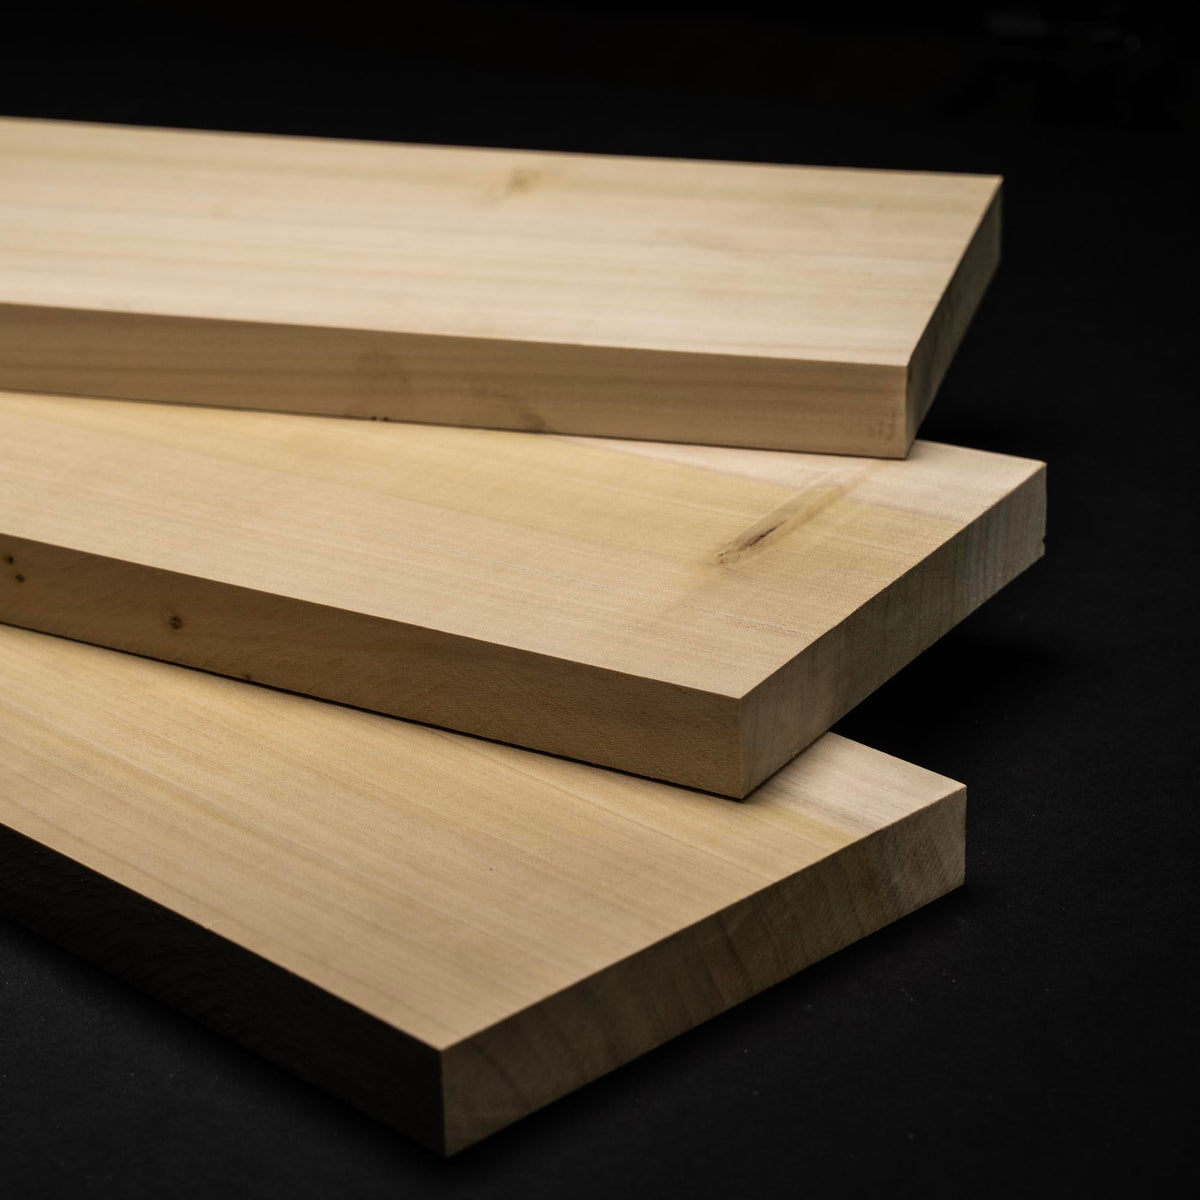 4/4 1&quot; POPLAR Lumber Pack, S3S Clear/Select Boards - Kiln Dried - Packs of 10, 50, 100 Board Feet